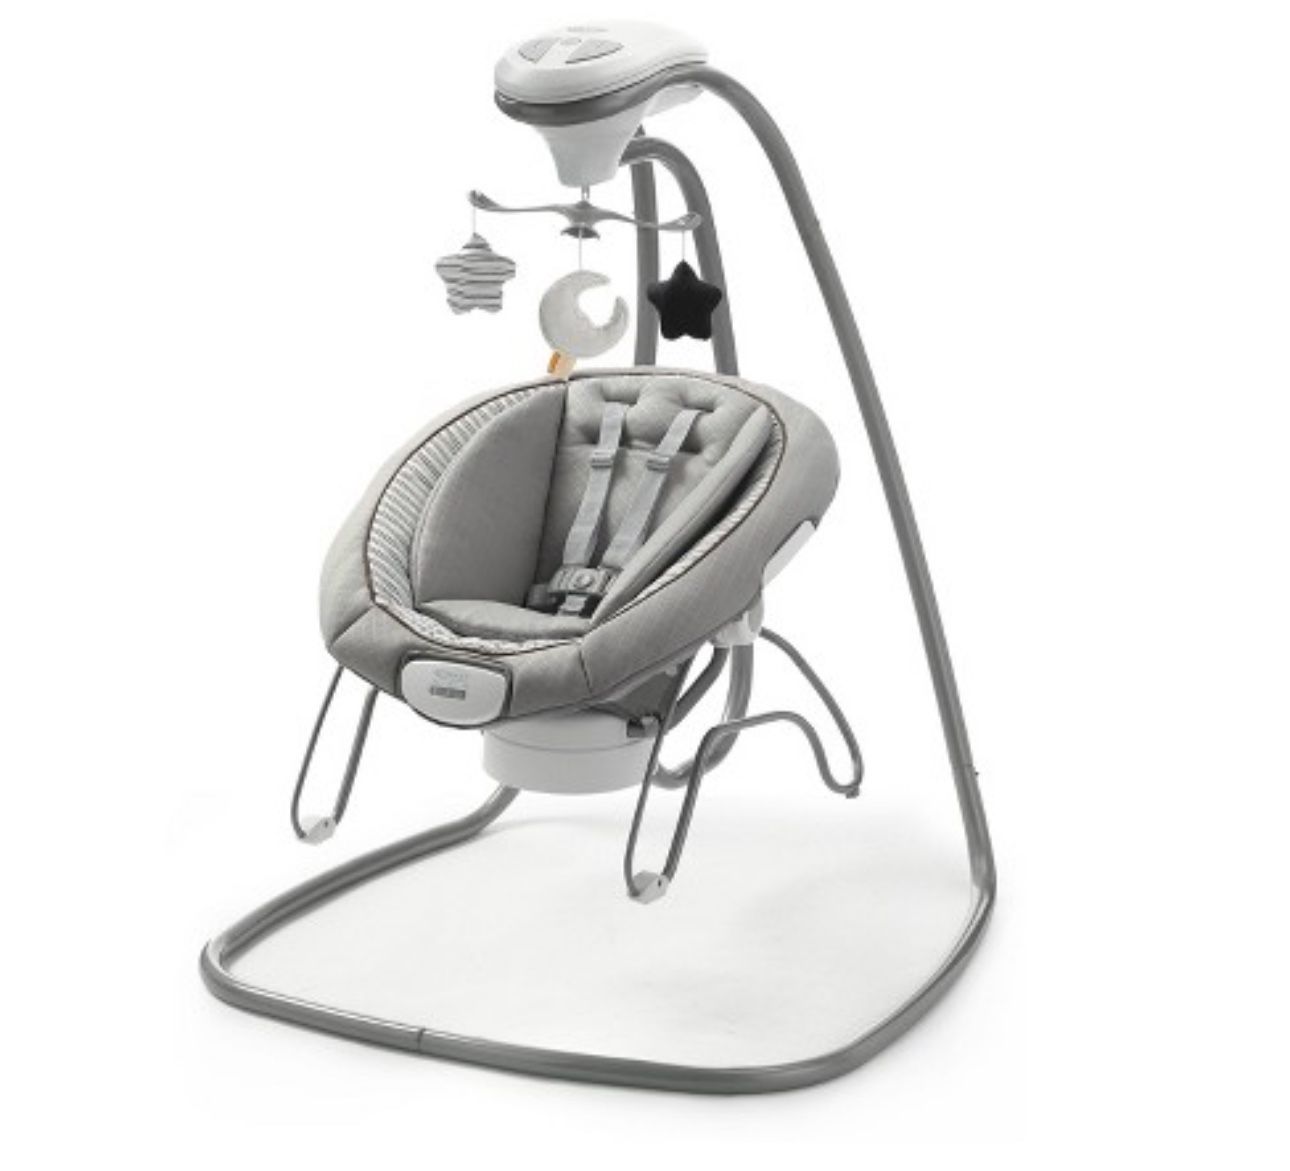 Brand new Graco Duet connect multi directional baby swing and bouncer We can deliver with the Metropolis  Questions are welcome 